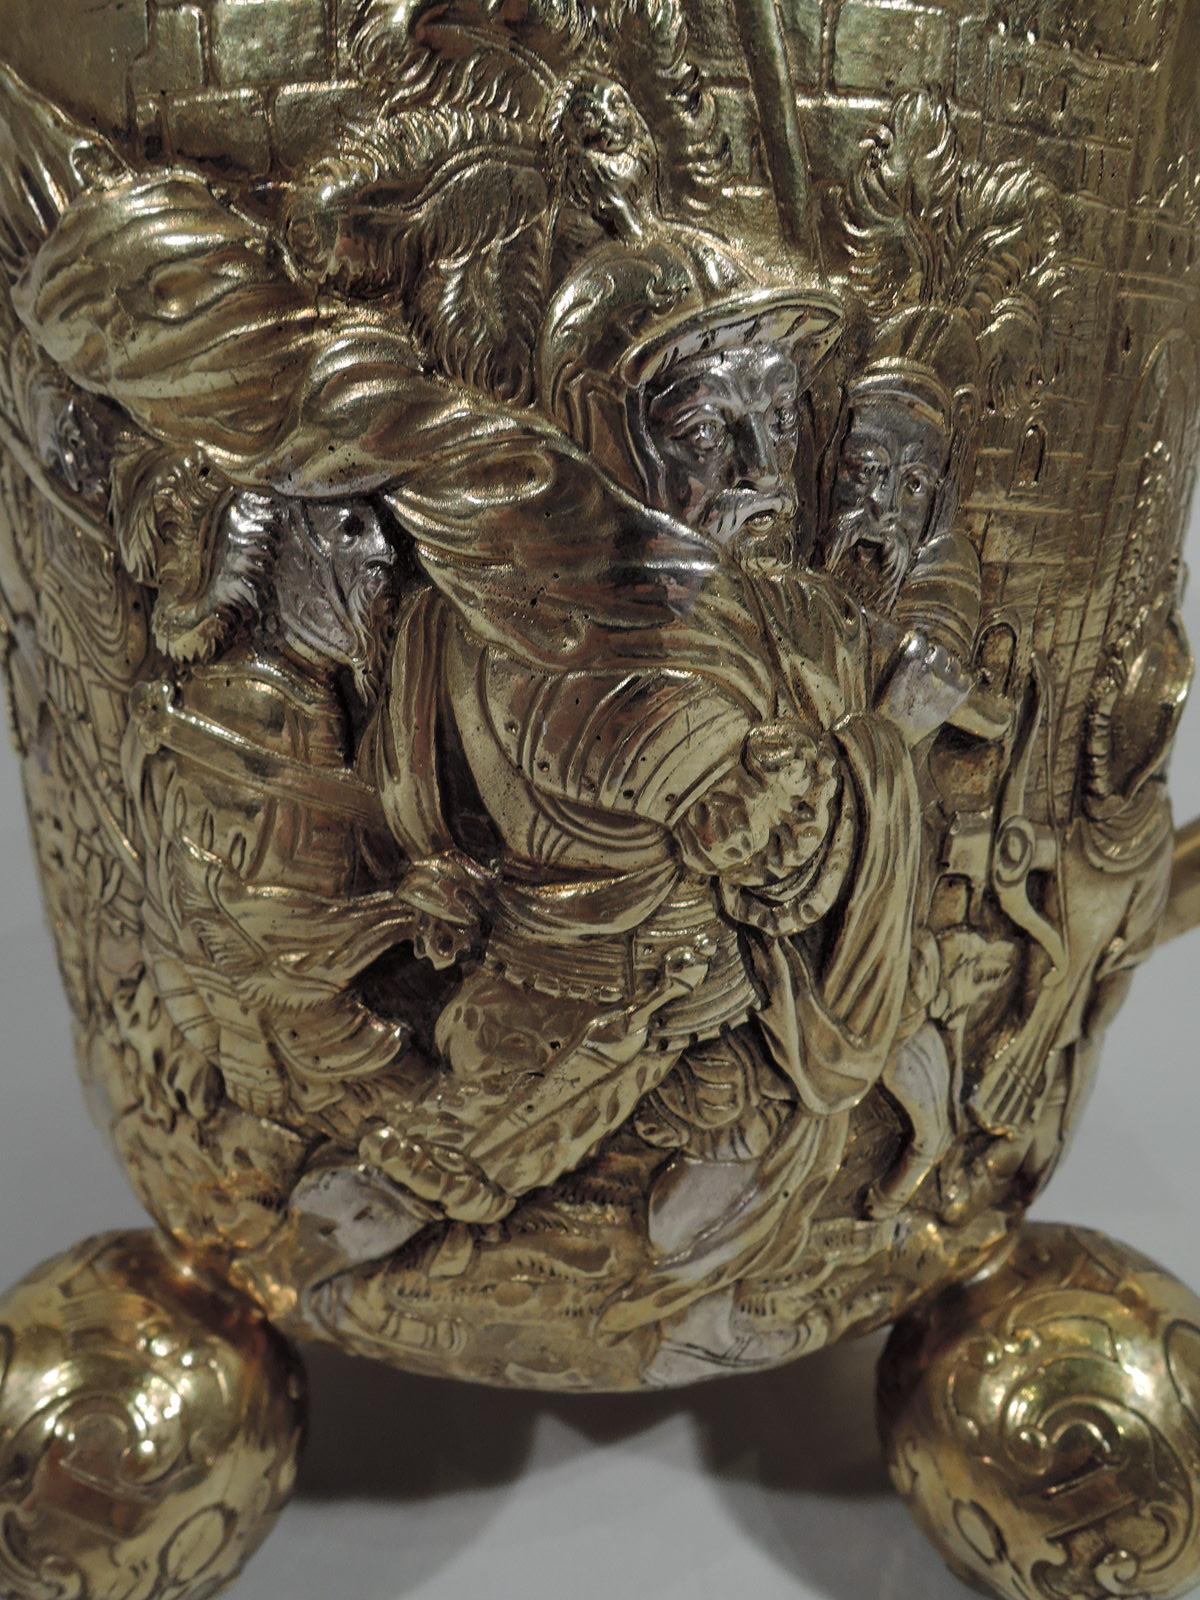 19th Century Antique German Gothic Silver Gilt Tankard with Teutonic Frieze